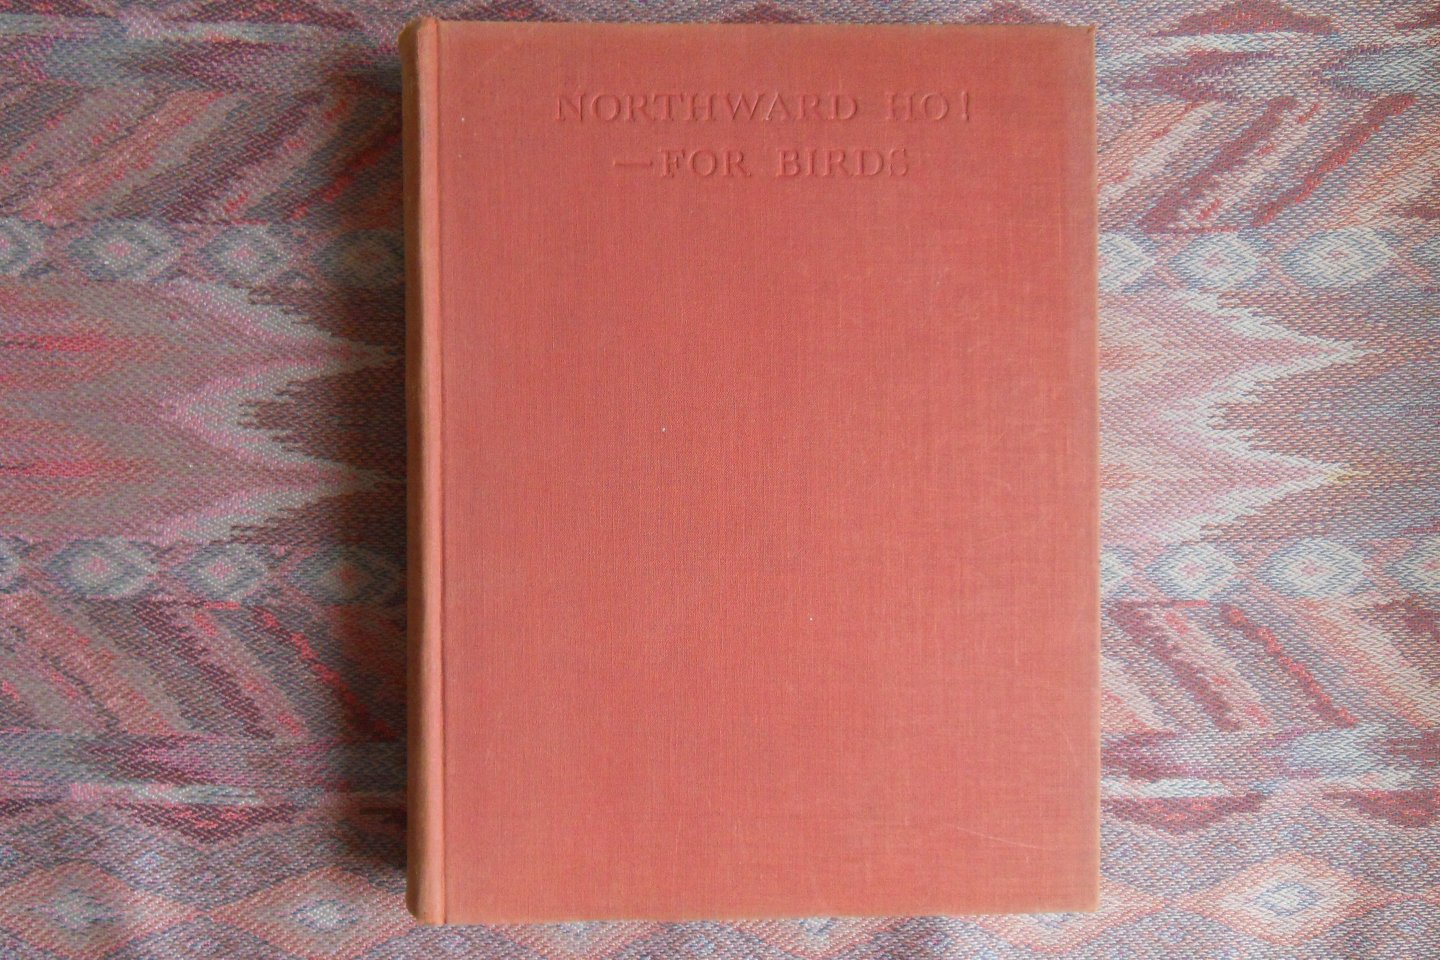 Chislett, Ralph. - Northward Ho! - For Birds. - From Wild Moorlands of England to Moorlands and Marshes of Scotland and Shetland Öland and Lapland.